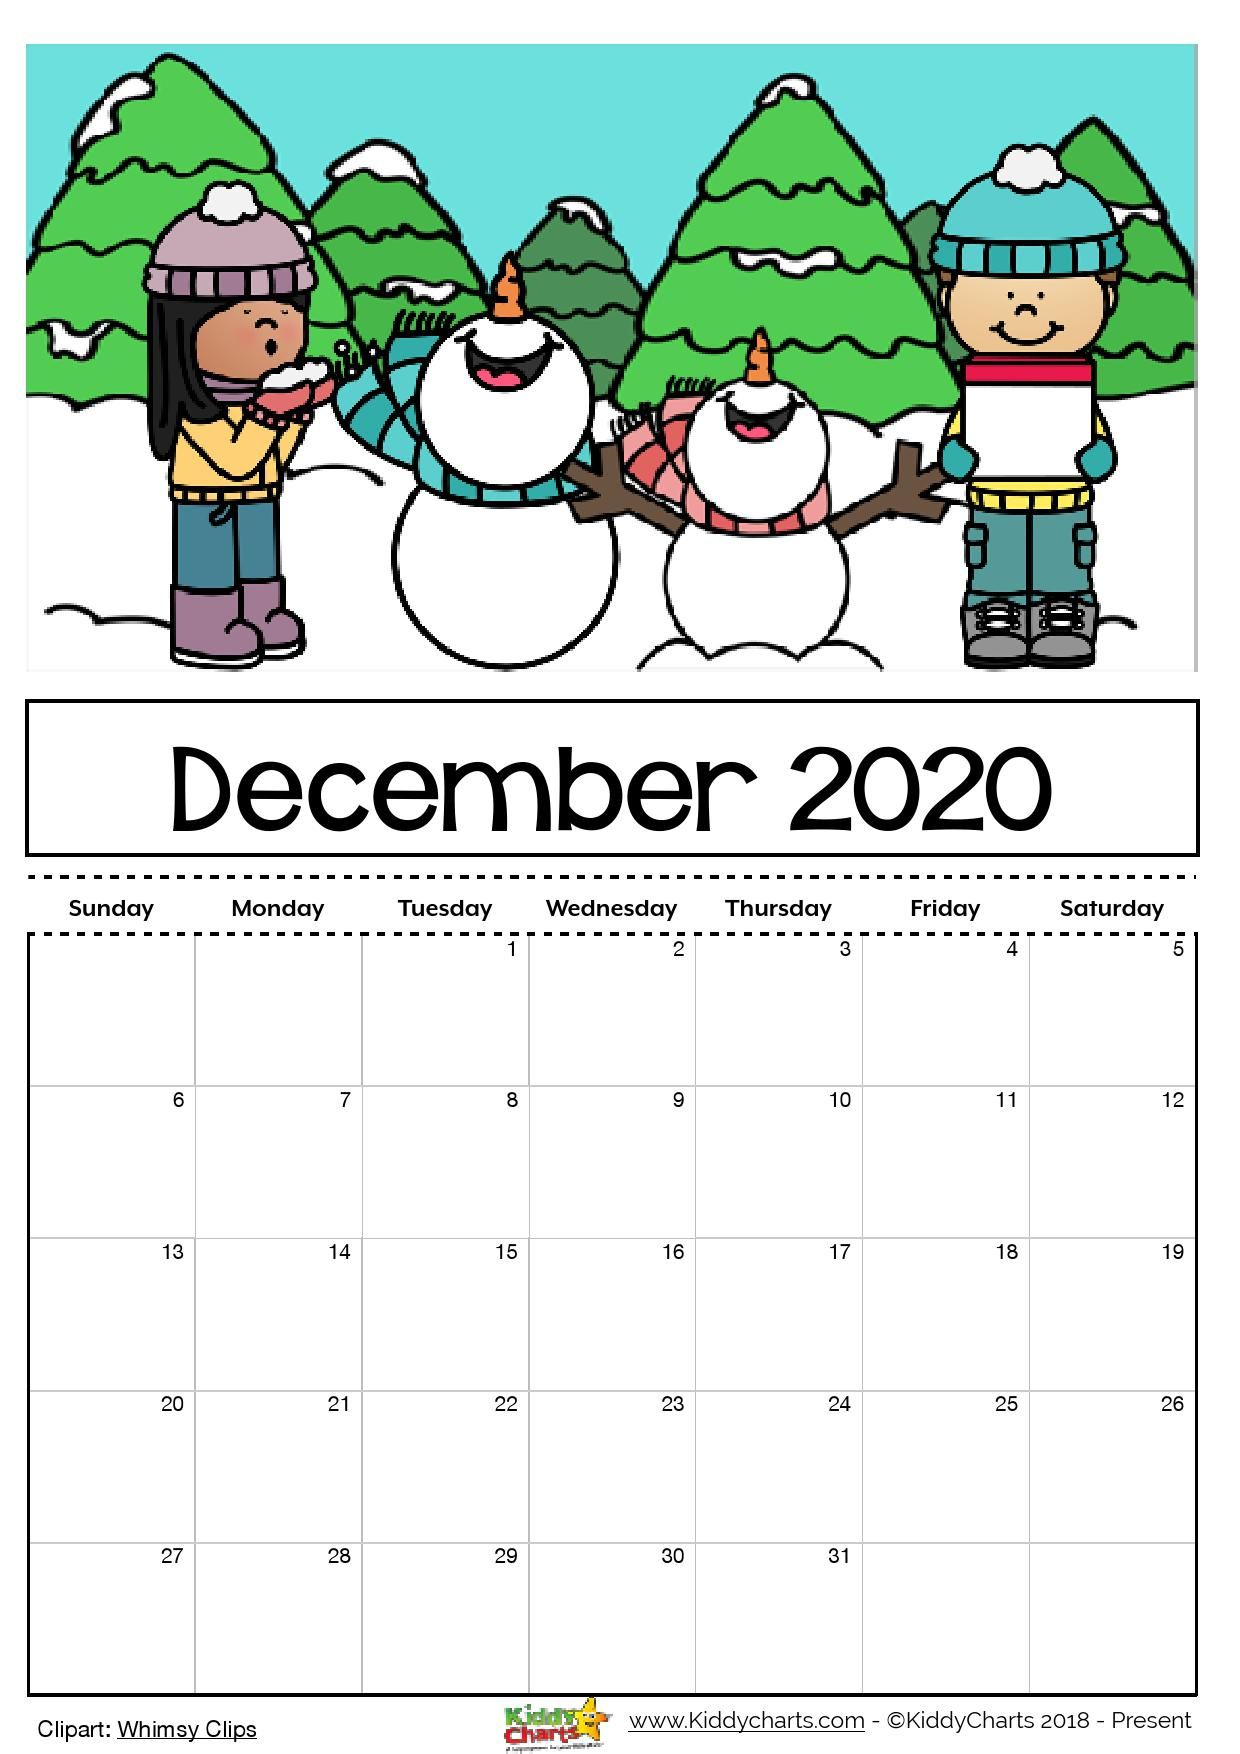 Check Out Our Free Editable 2020 Calendar Available For